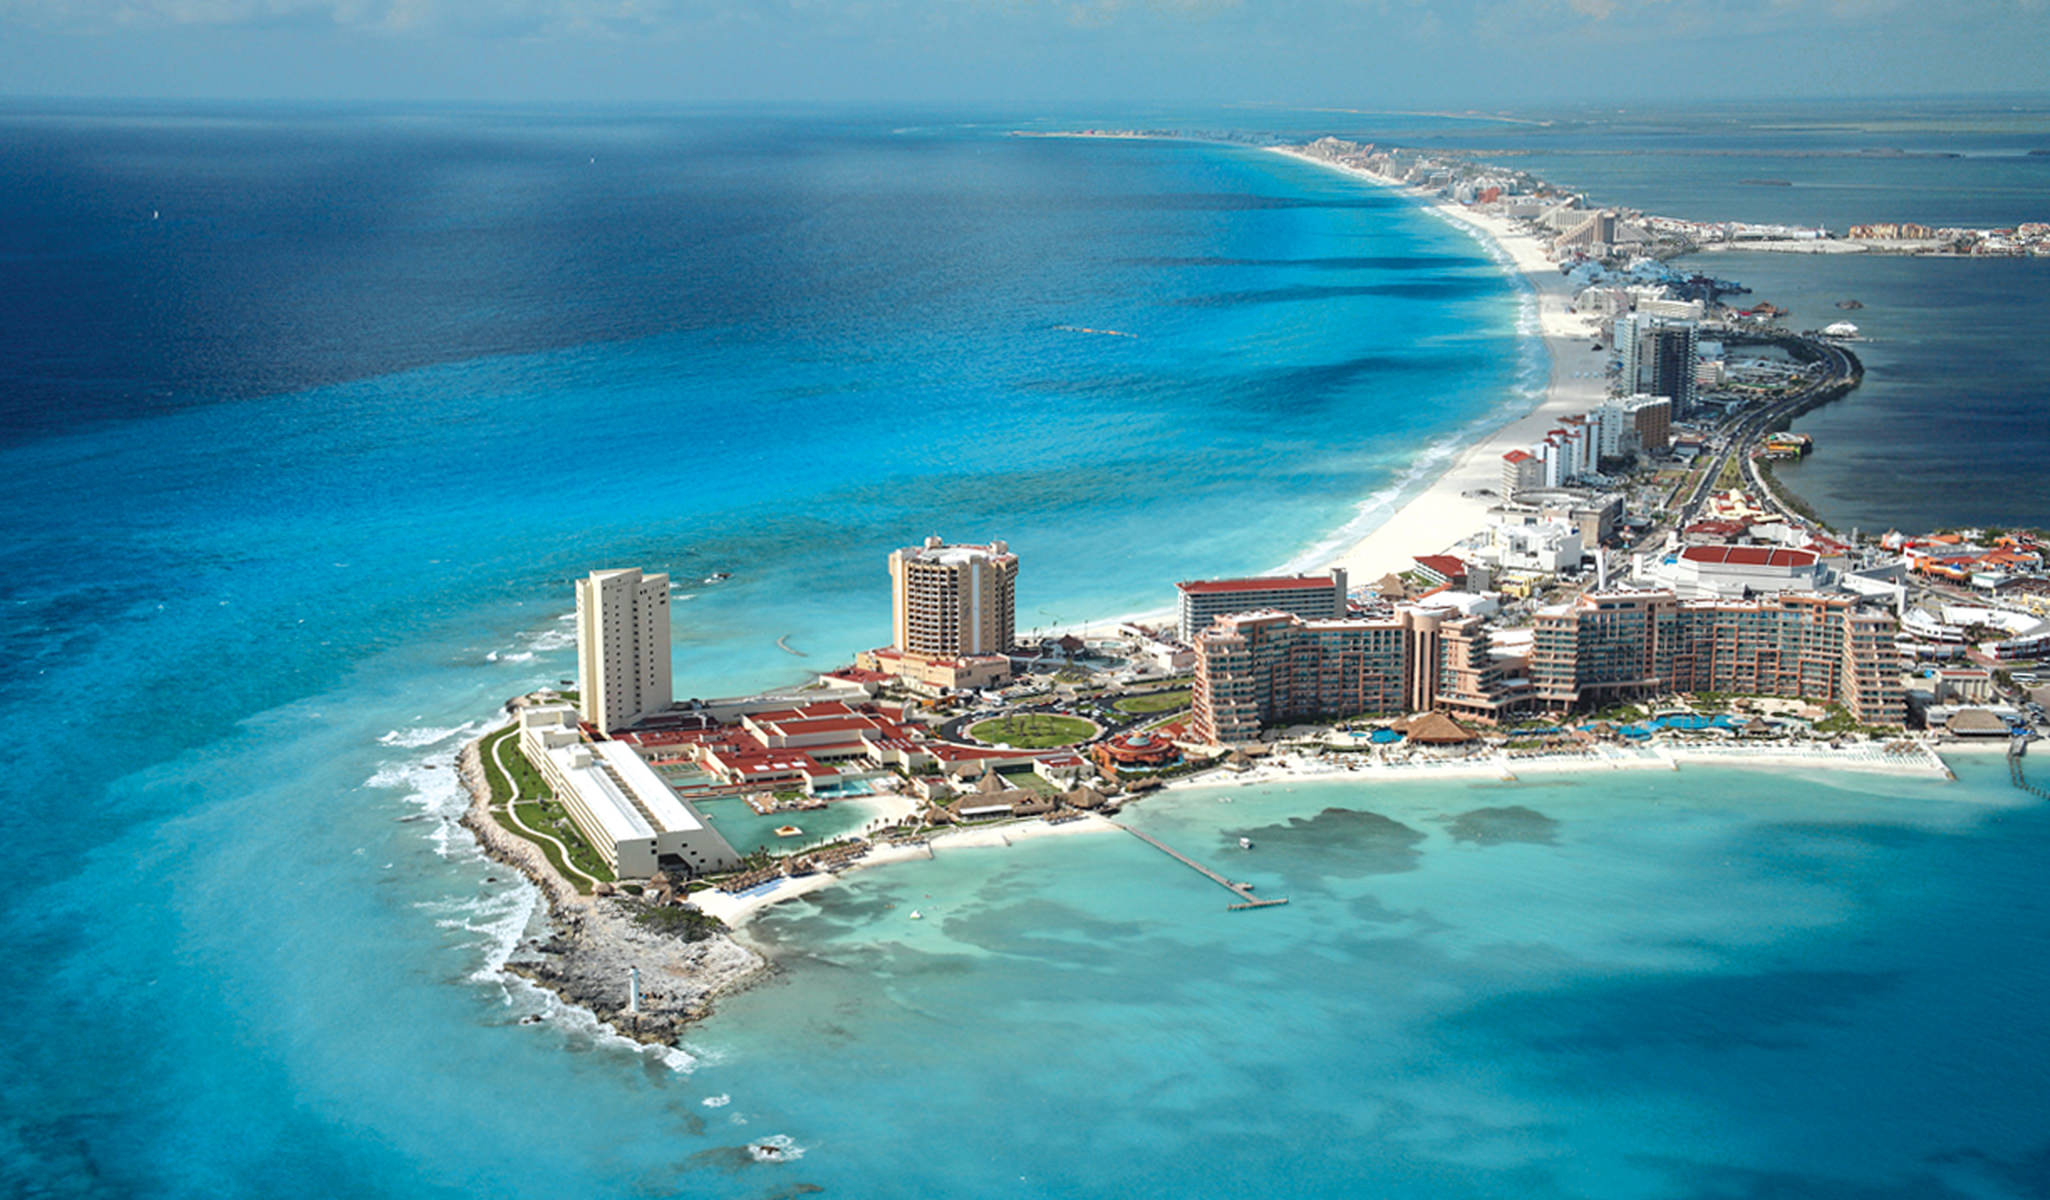 How to choose between Cancun, Cozumel and Riviera Maya